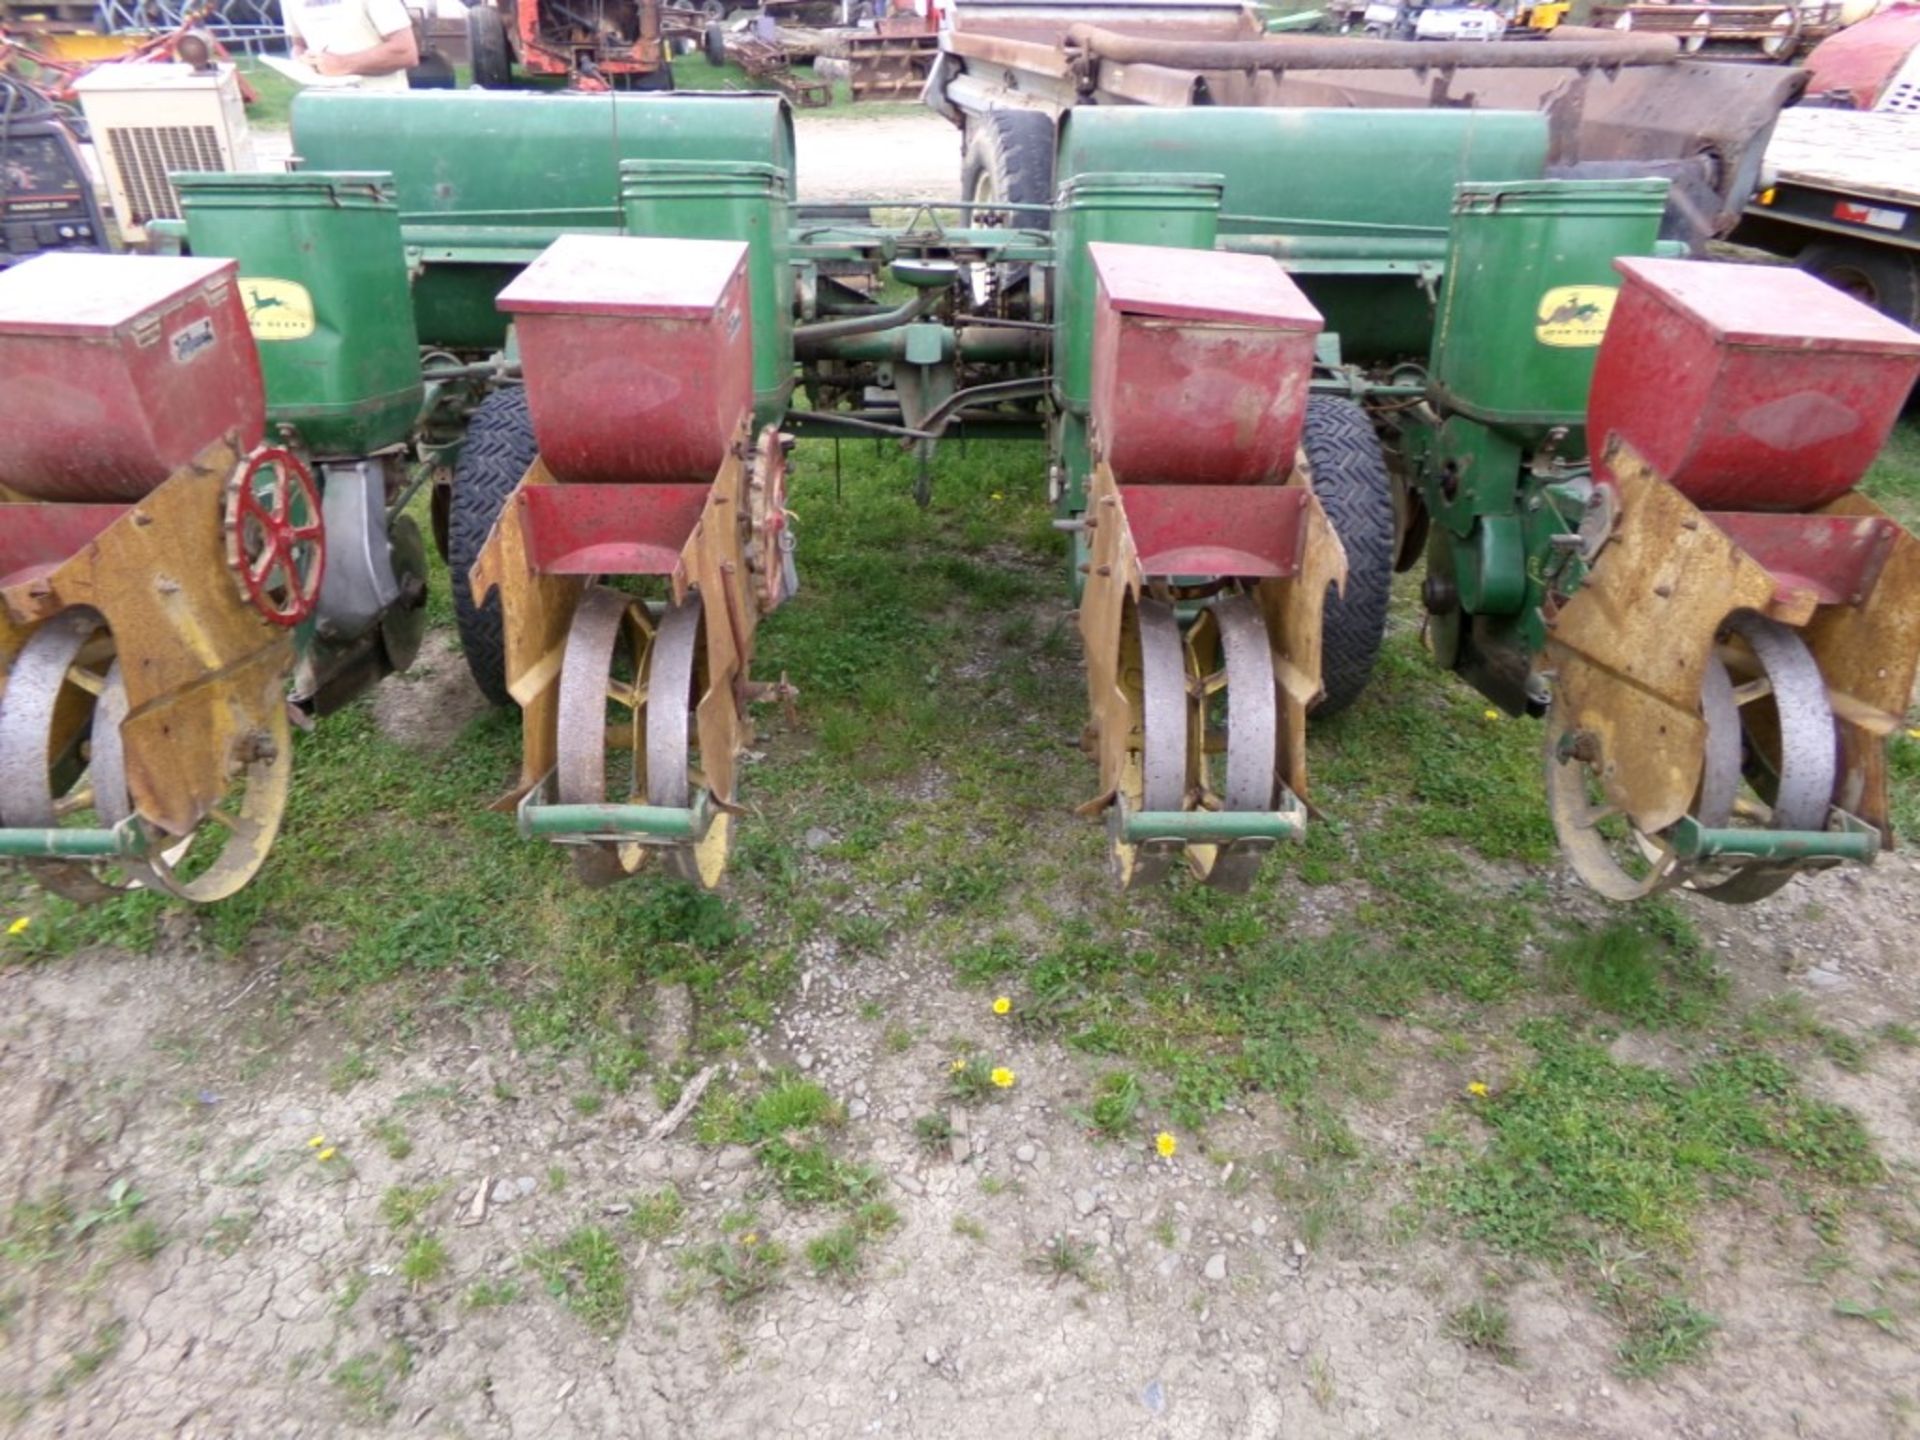 John Deere 4 Row Corn Planter 1240 with Insecticide Boxes (5065) - Image 2 of 3